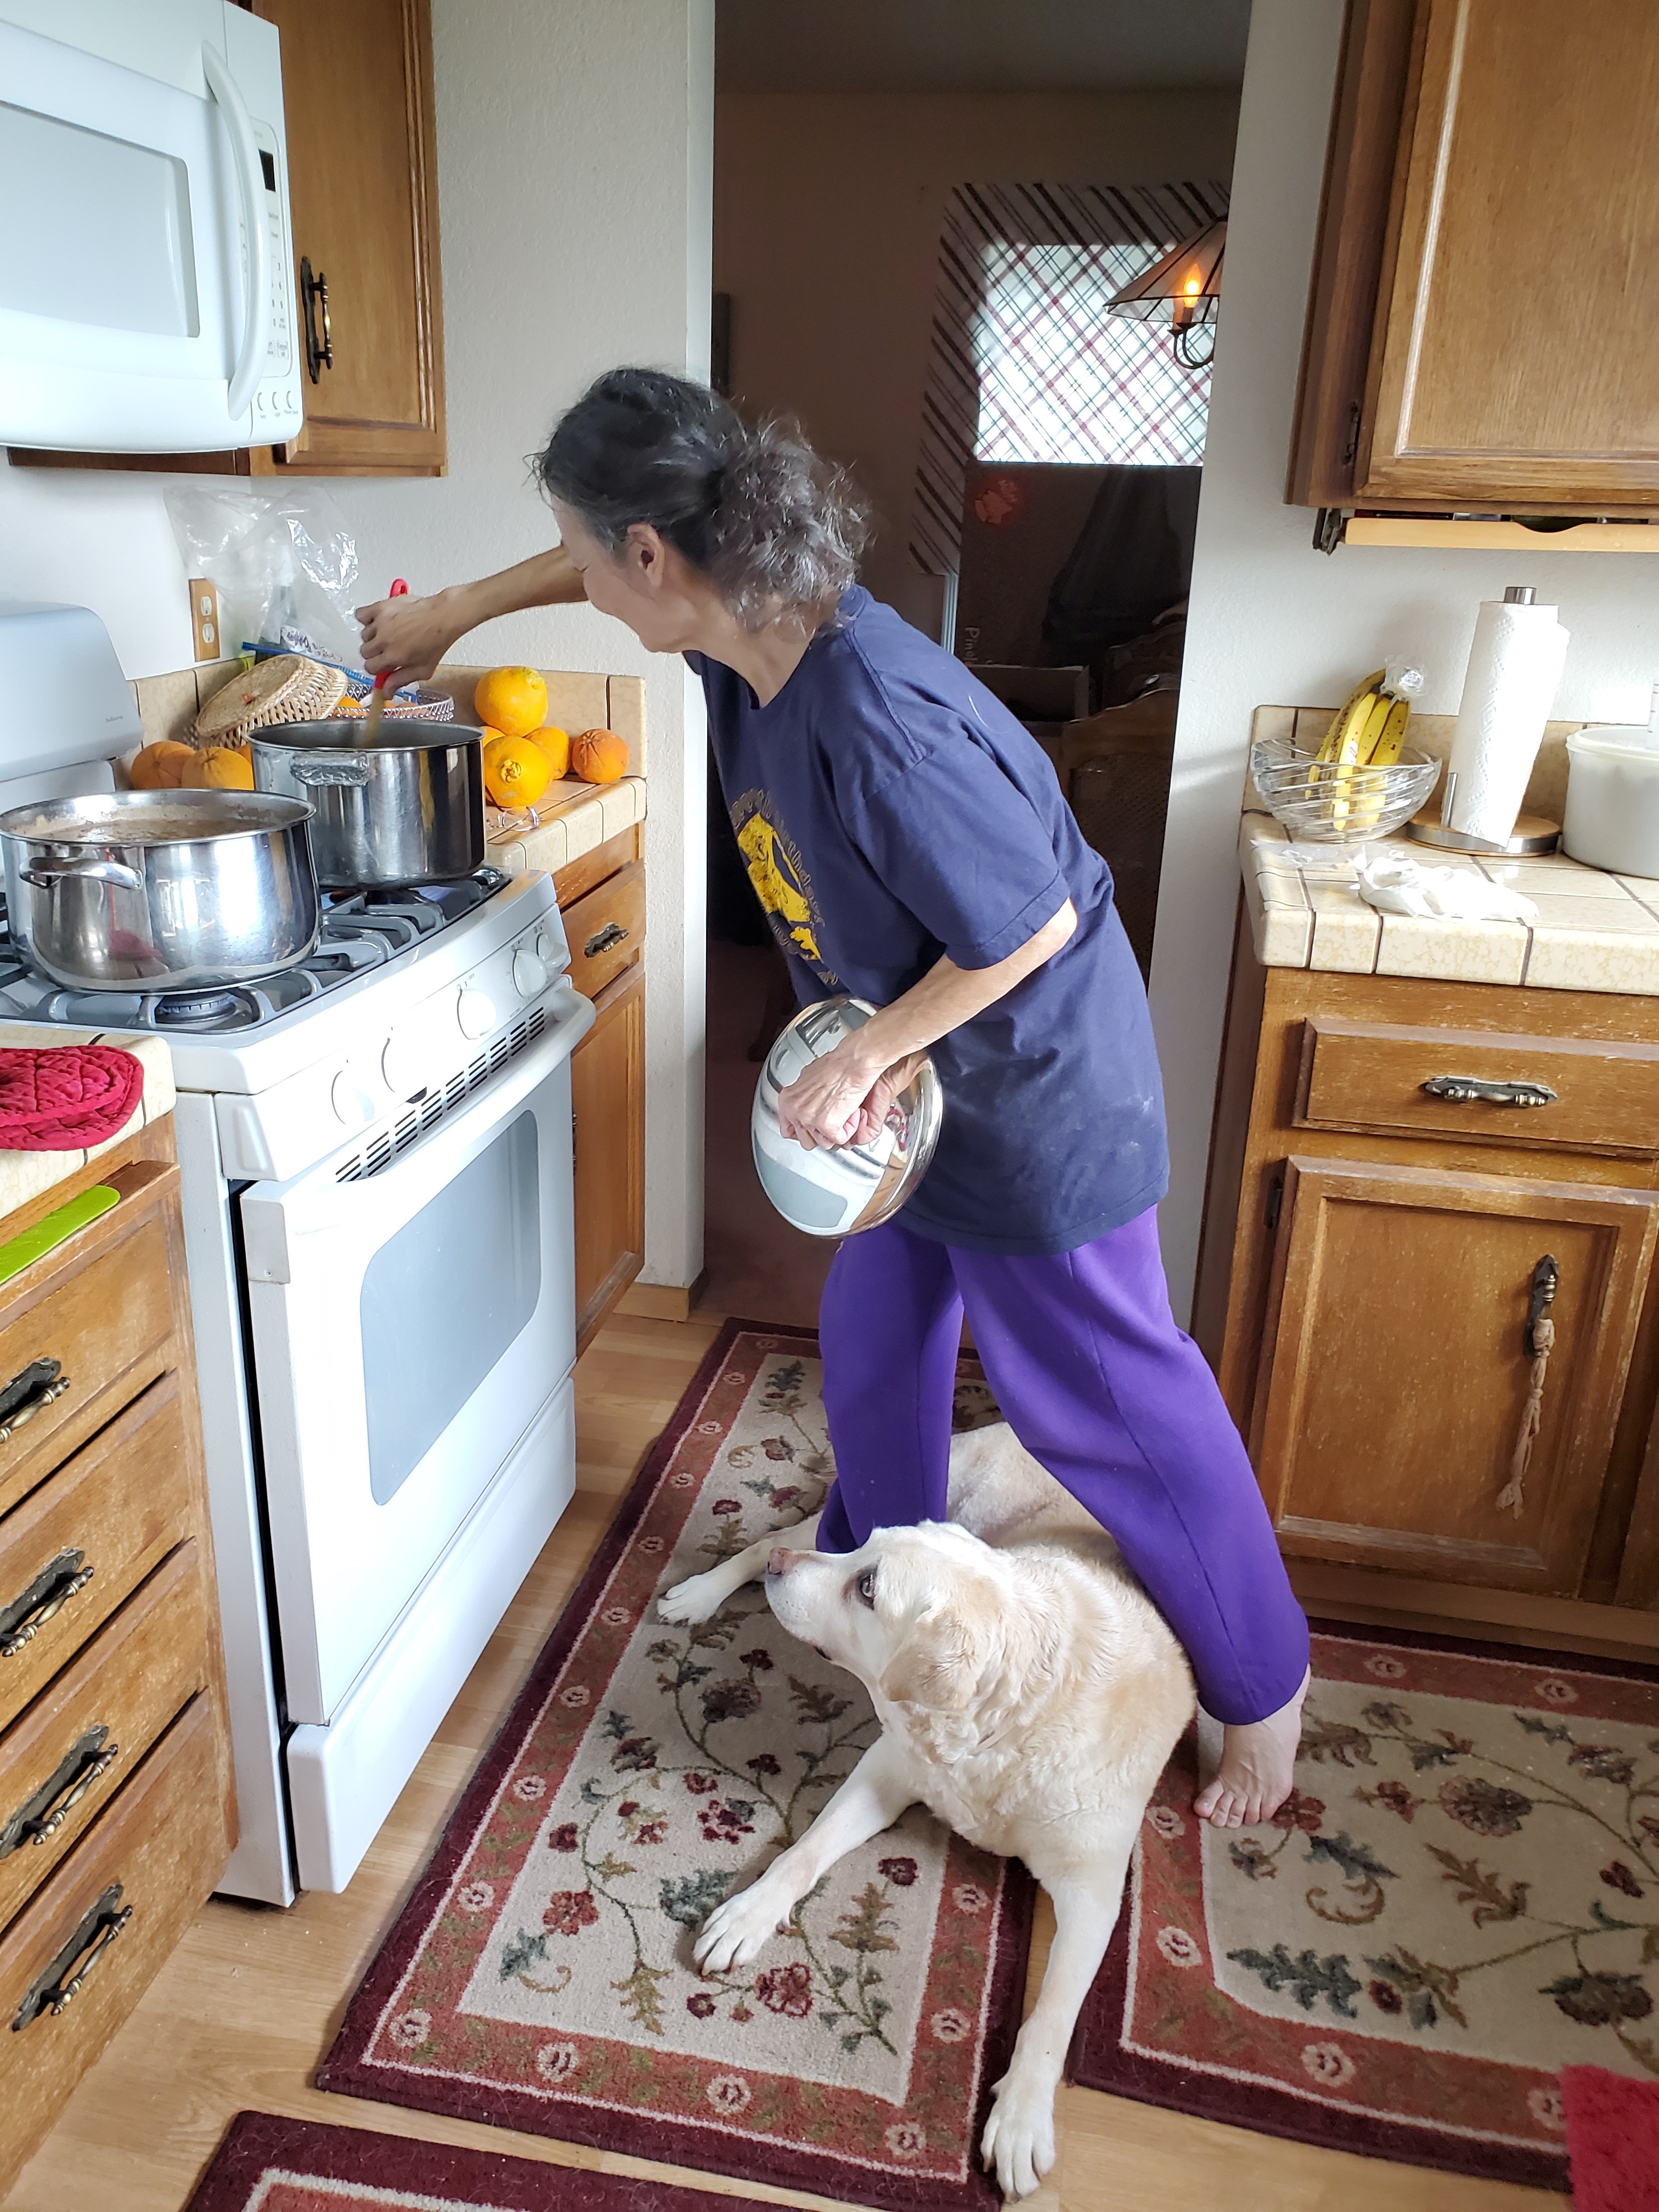 Mary Ann cooking at her kitchen stove with a GDB foster dog at her feet.